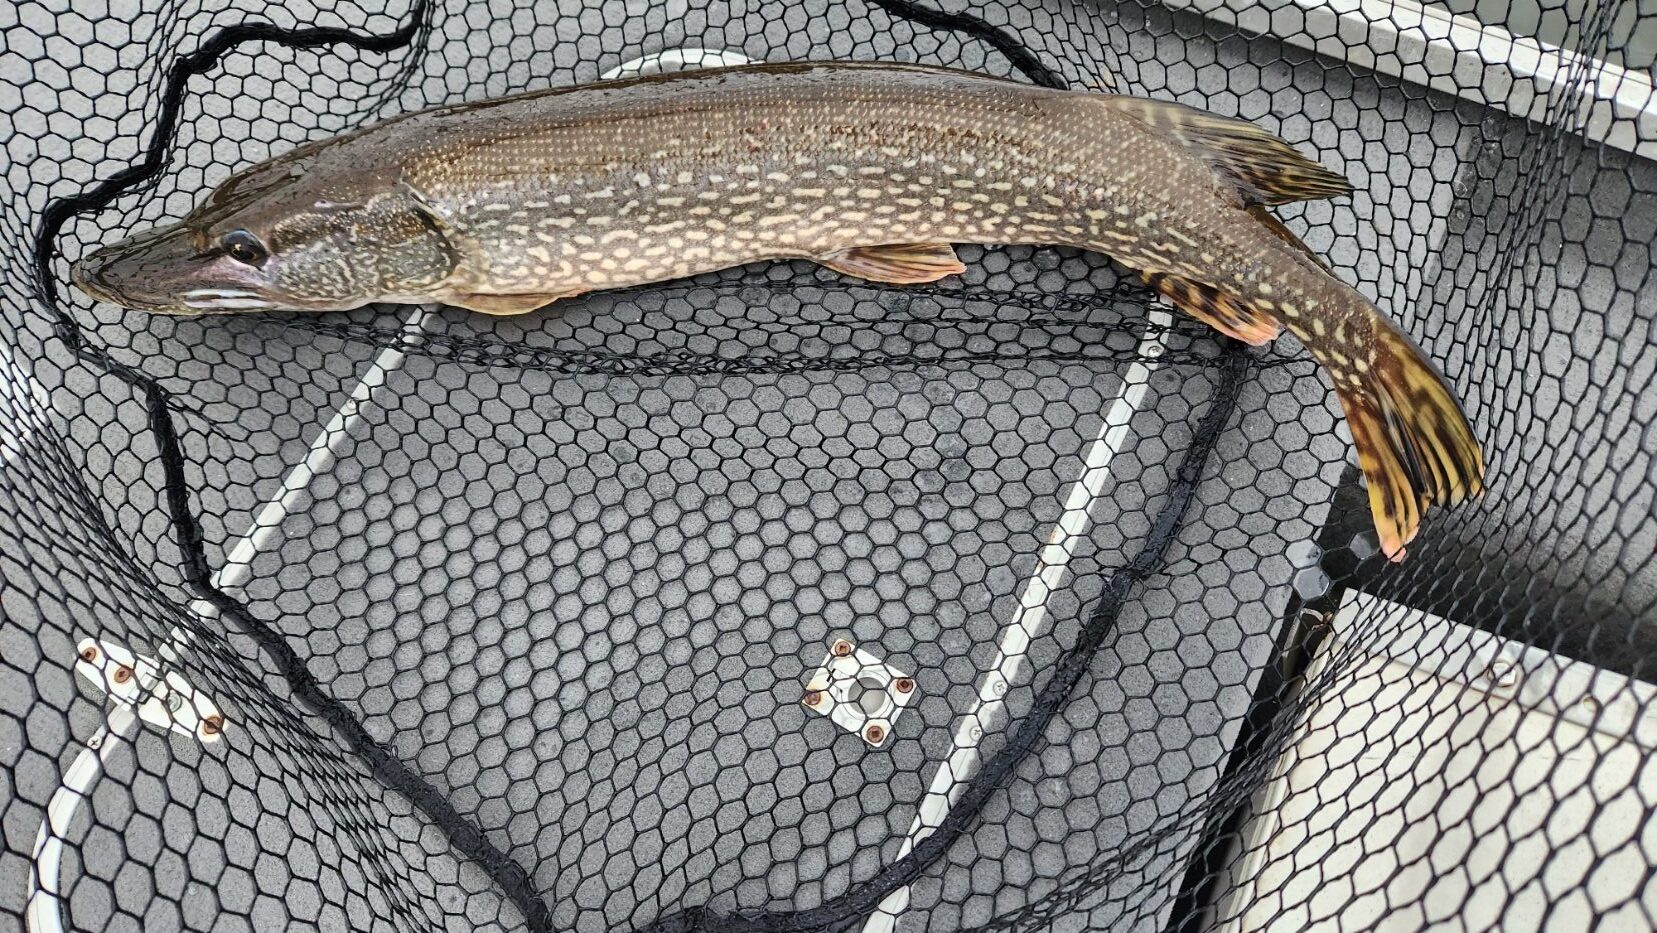 Northern pike in a fishing net.